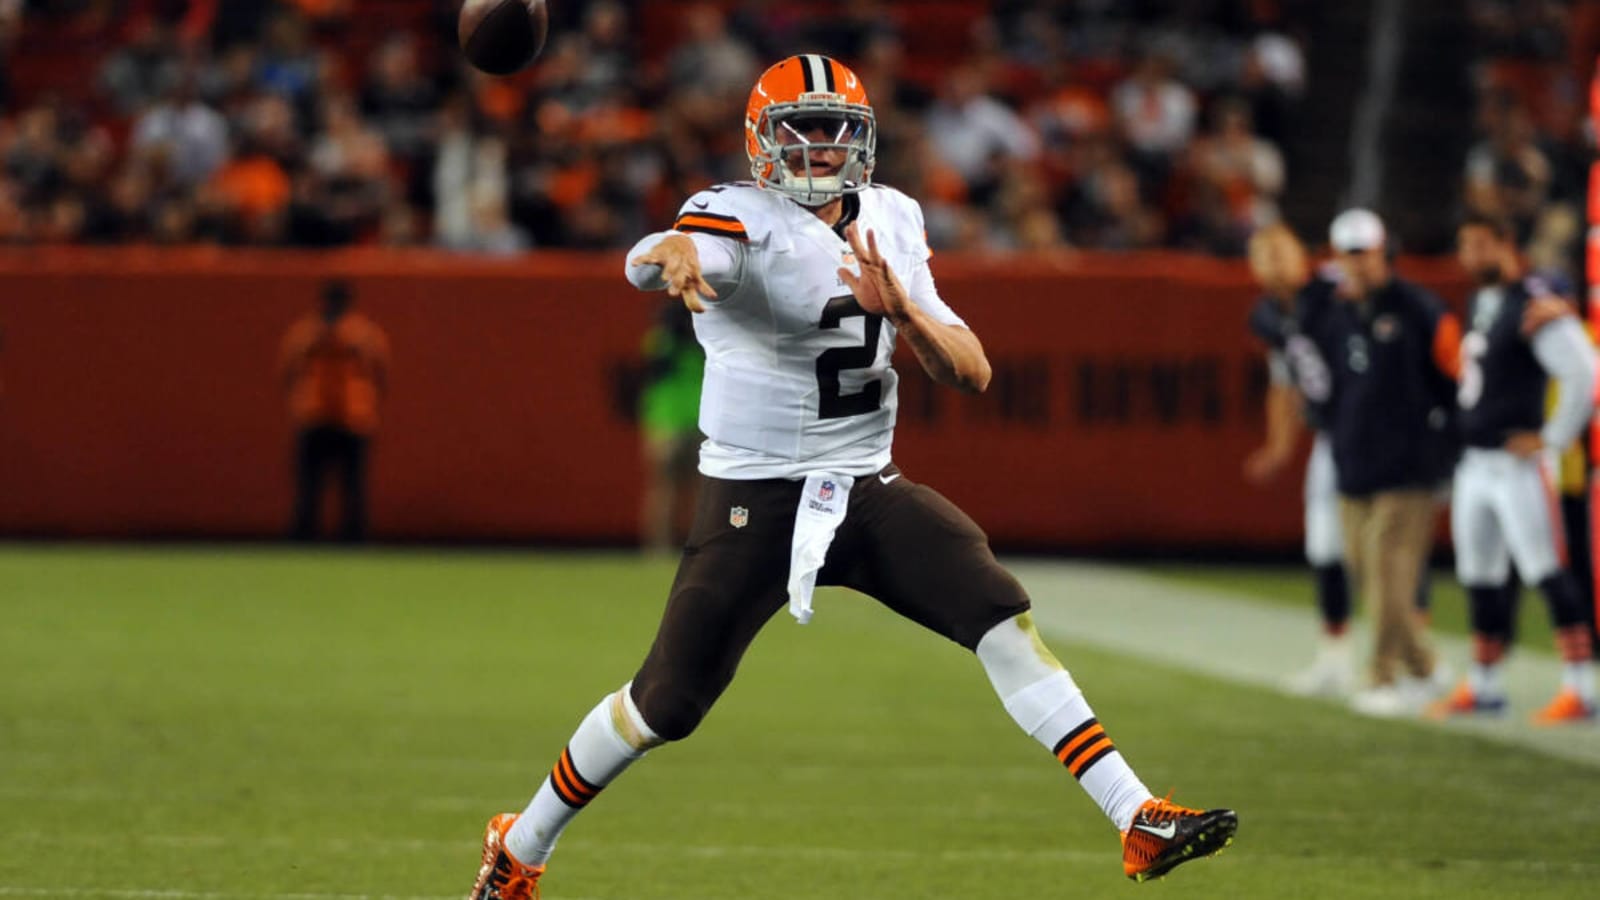 Browns Flameout Johnny Manziel Details Tense Relationship With Fellow QB Brian Hoyer